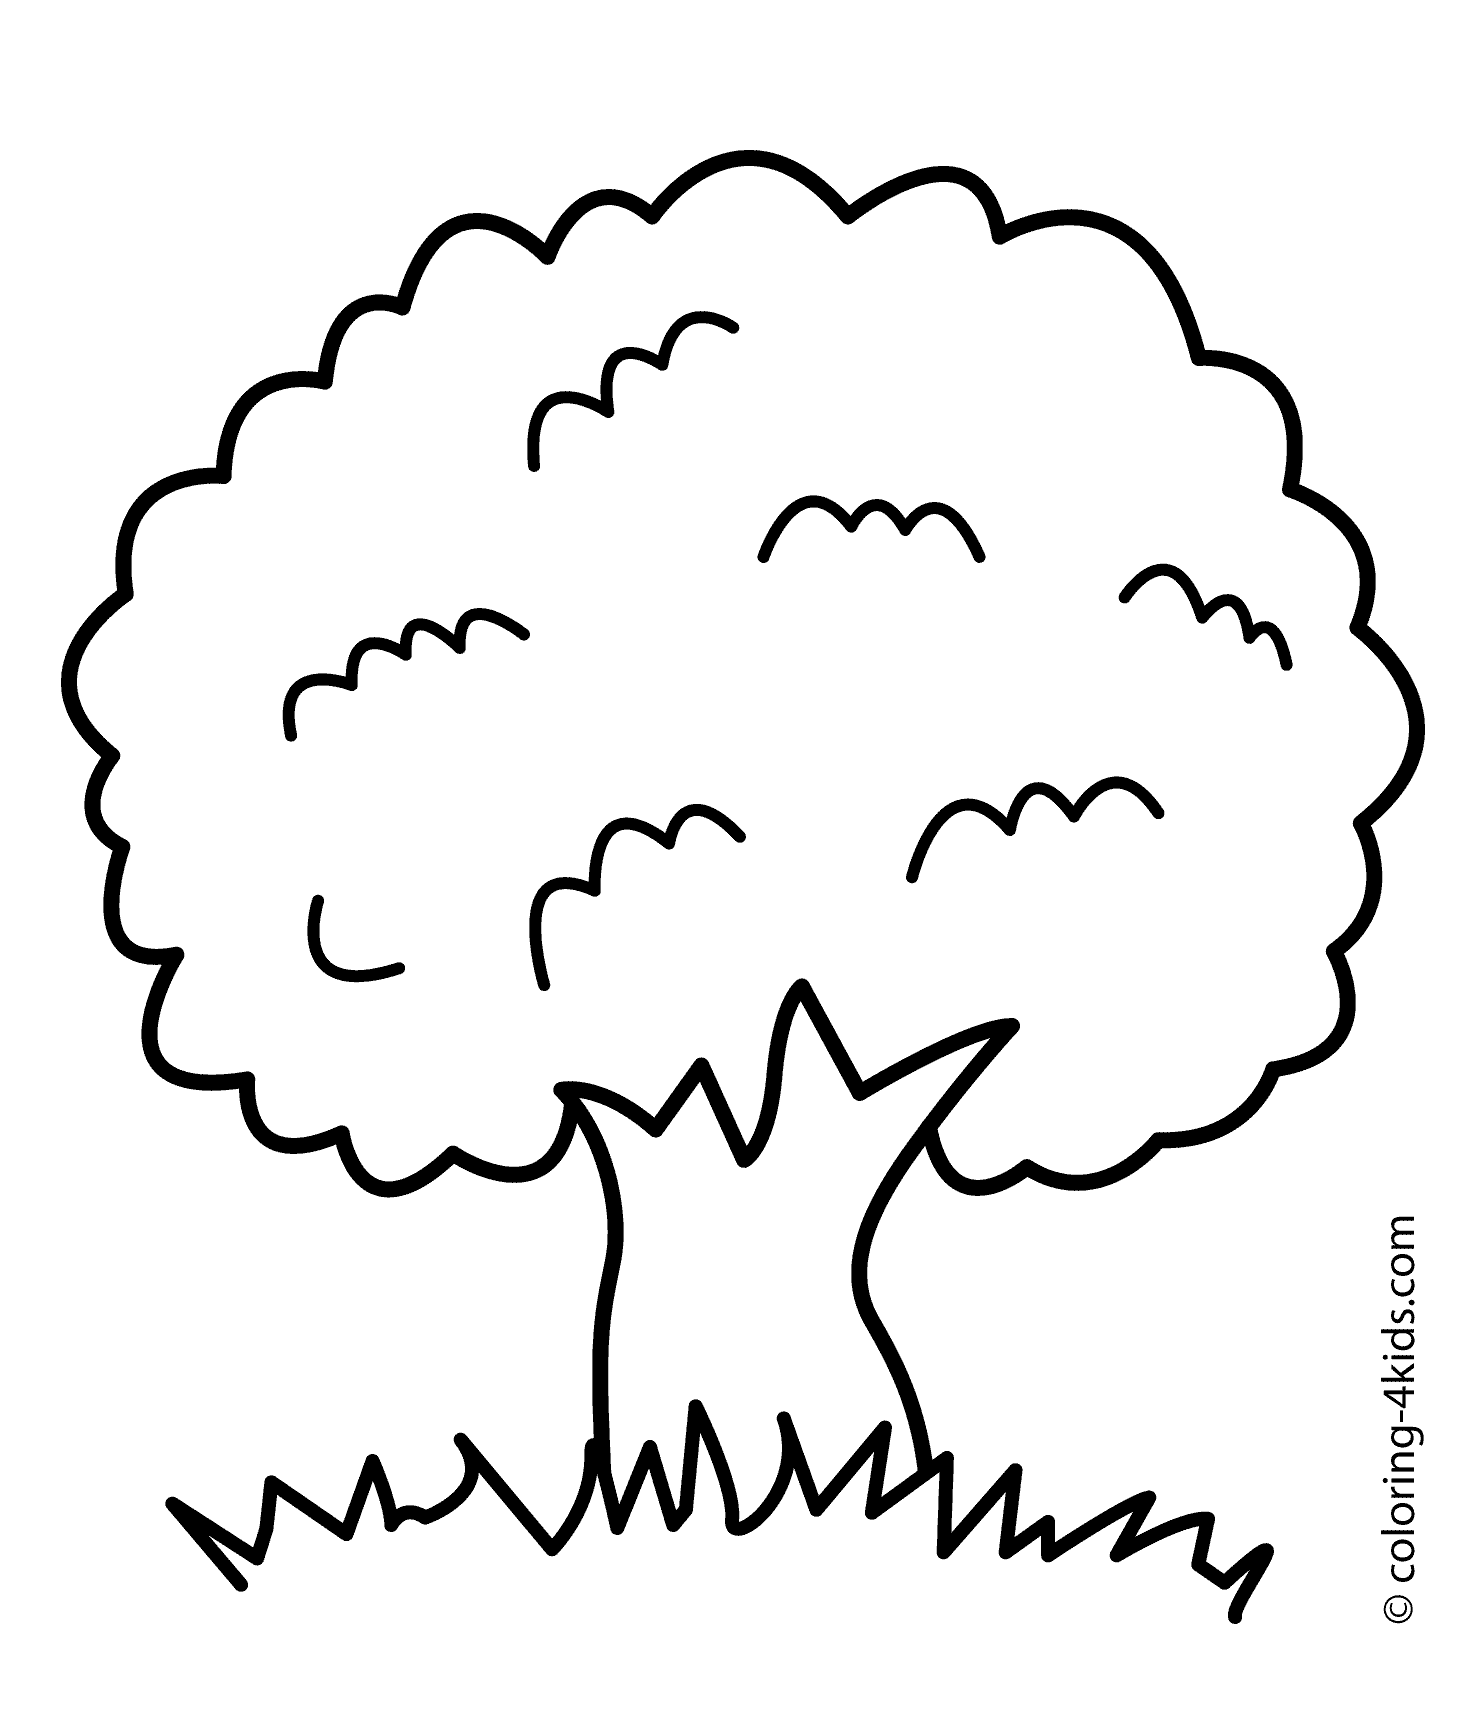 Simple Tree Coloring Page   Coloring Home